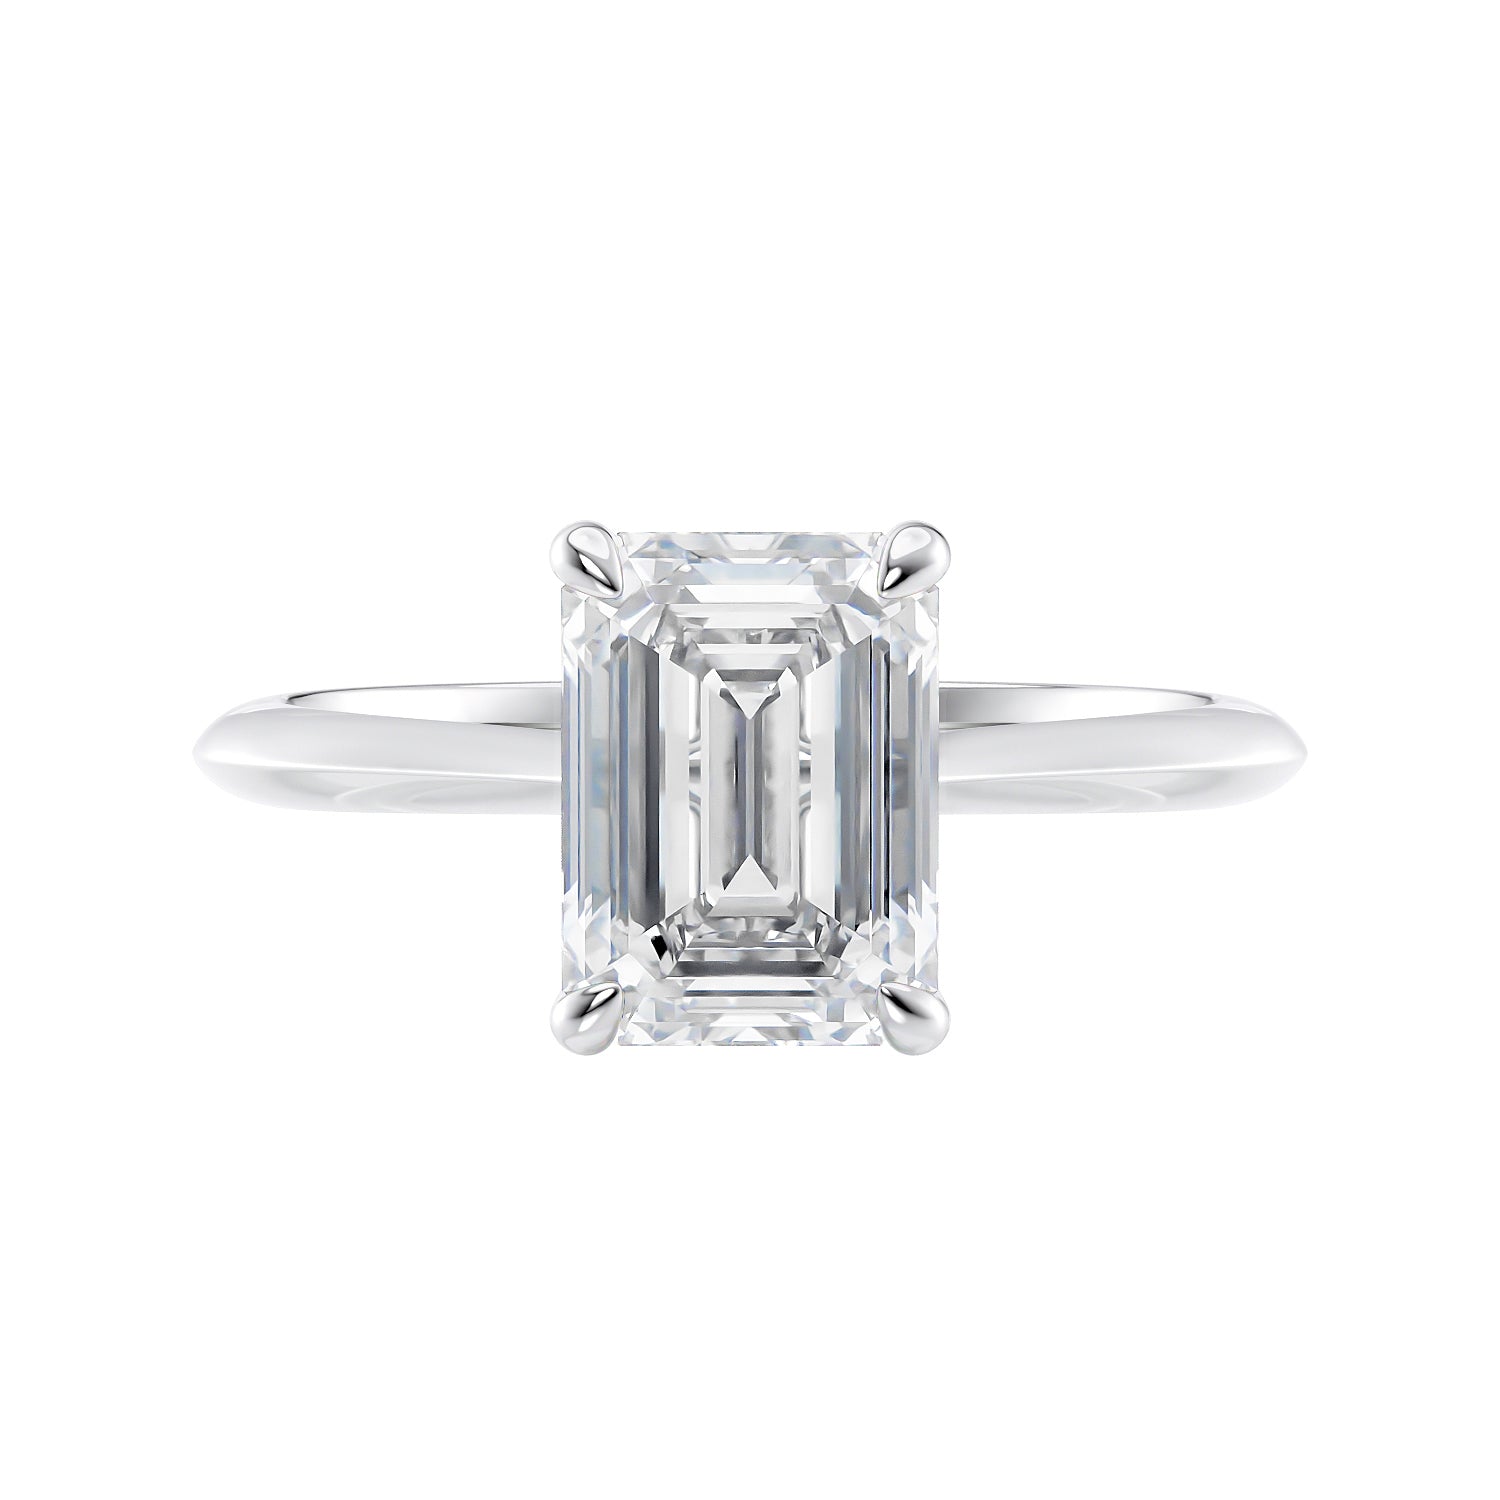 Emerald cut lab grown diamond hidden halo engagement ring white gold front view.